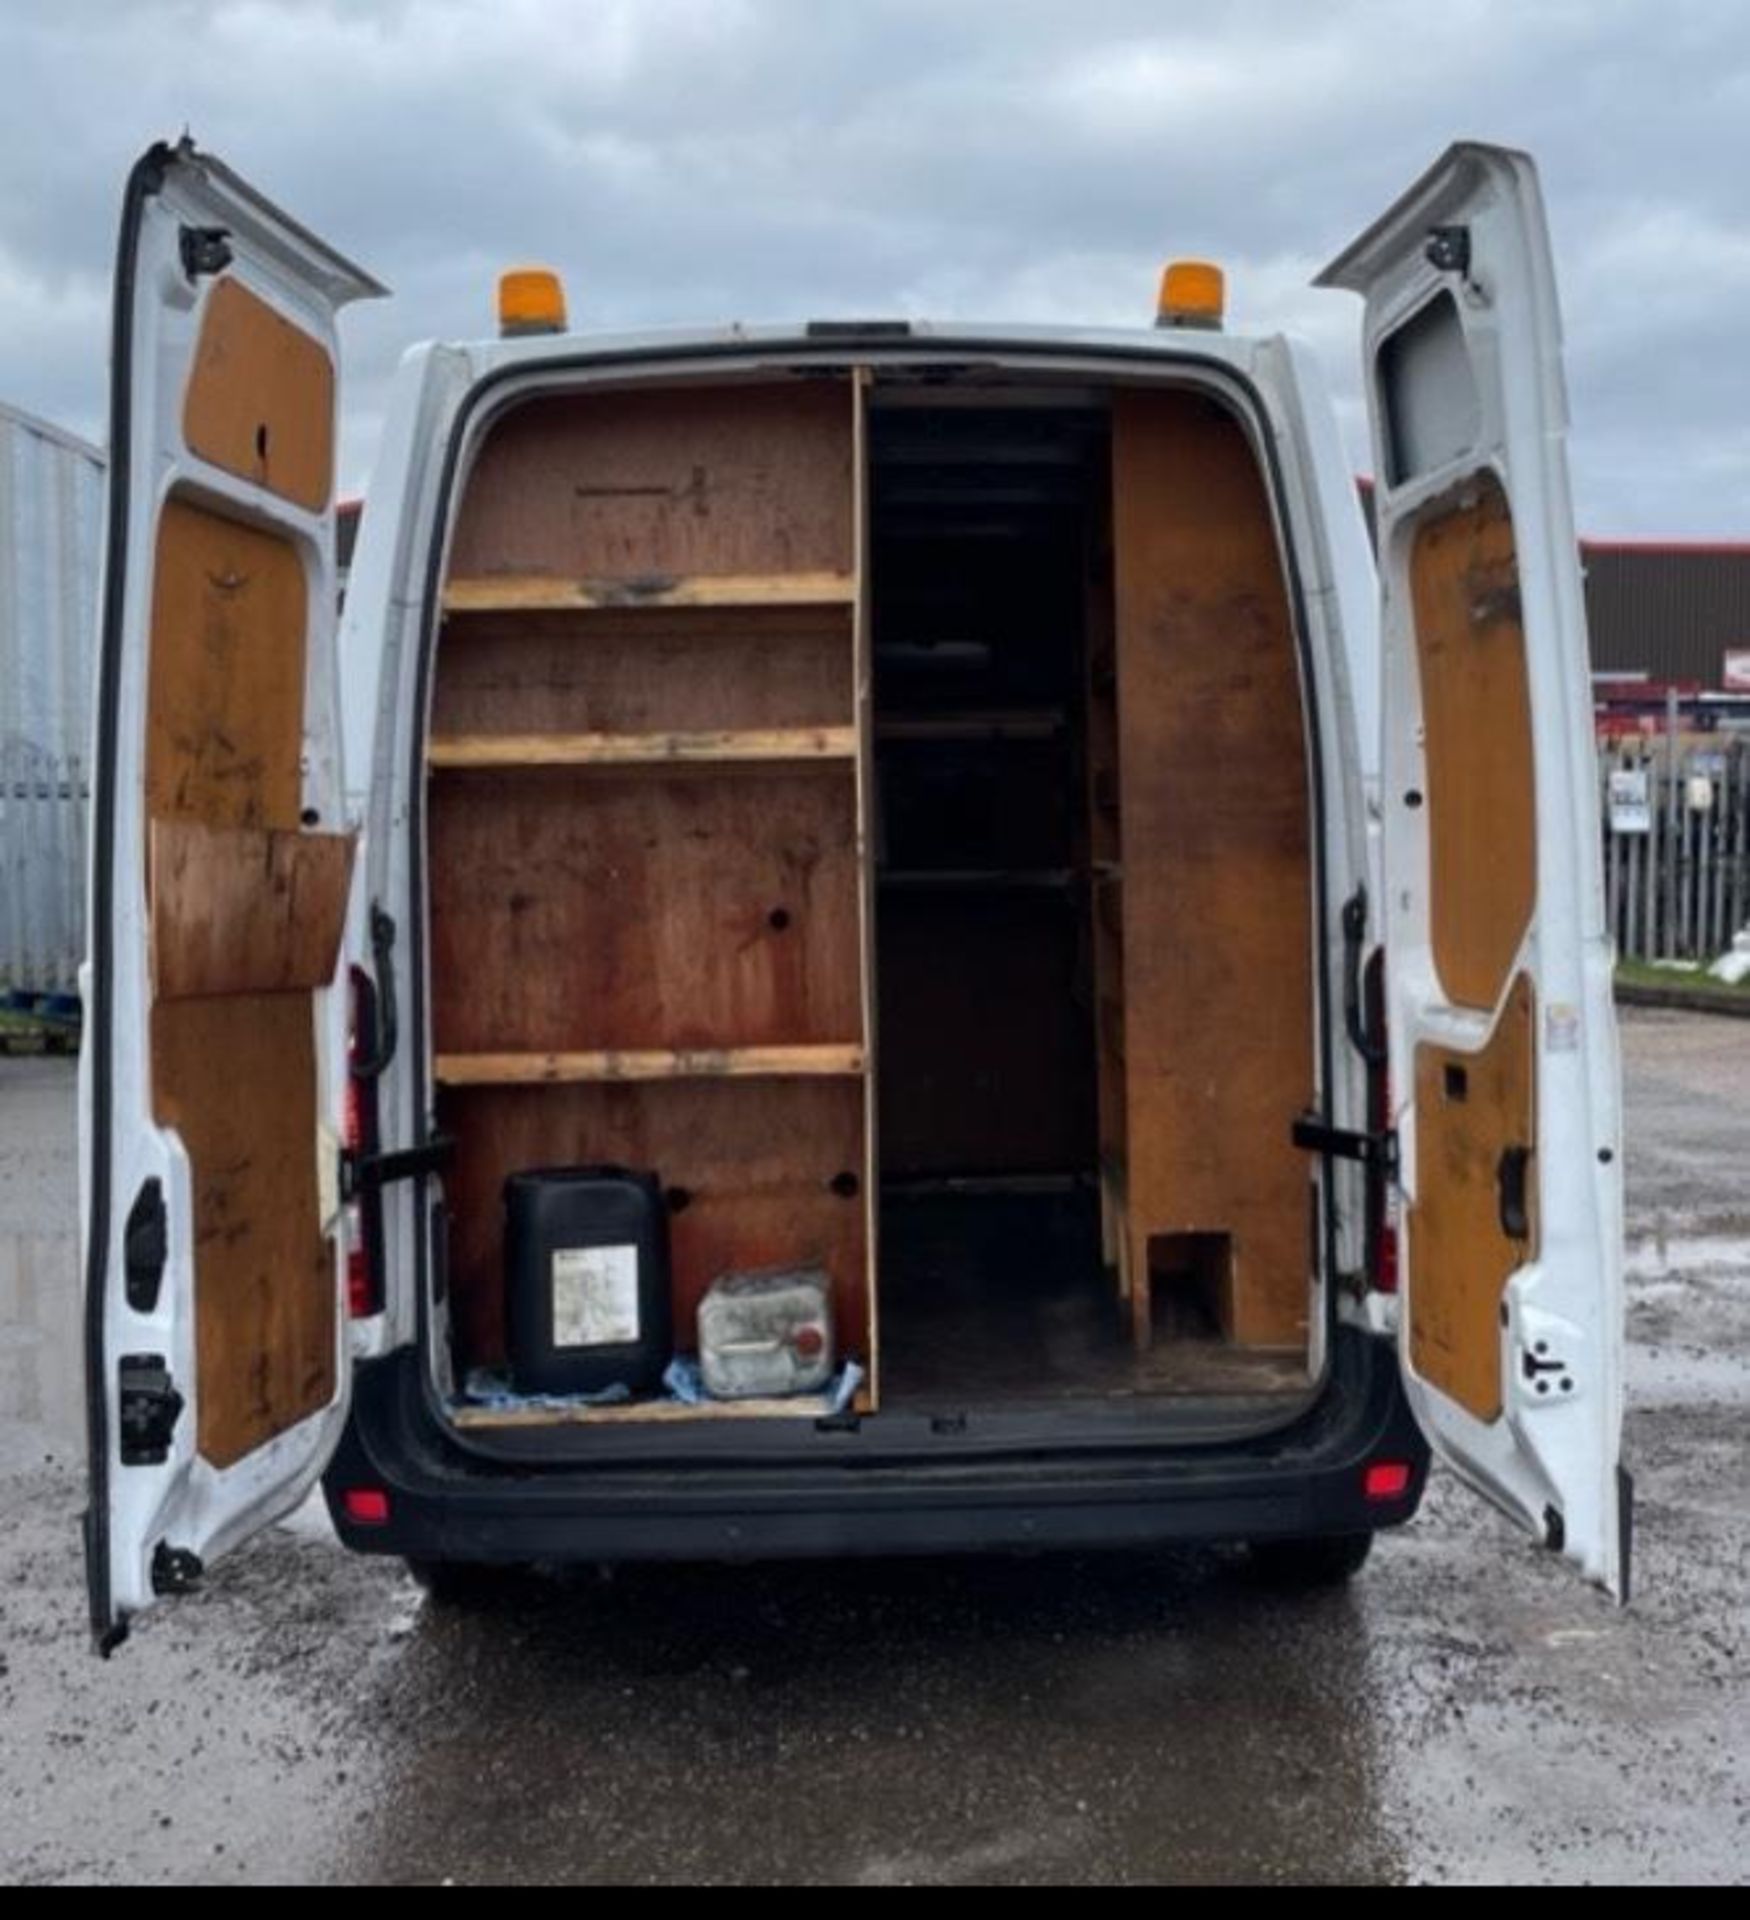 2019 RENAULT MASTER- 207K MILES- HPI CLEAR - READY TO GO! - Image 5 of 11